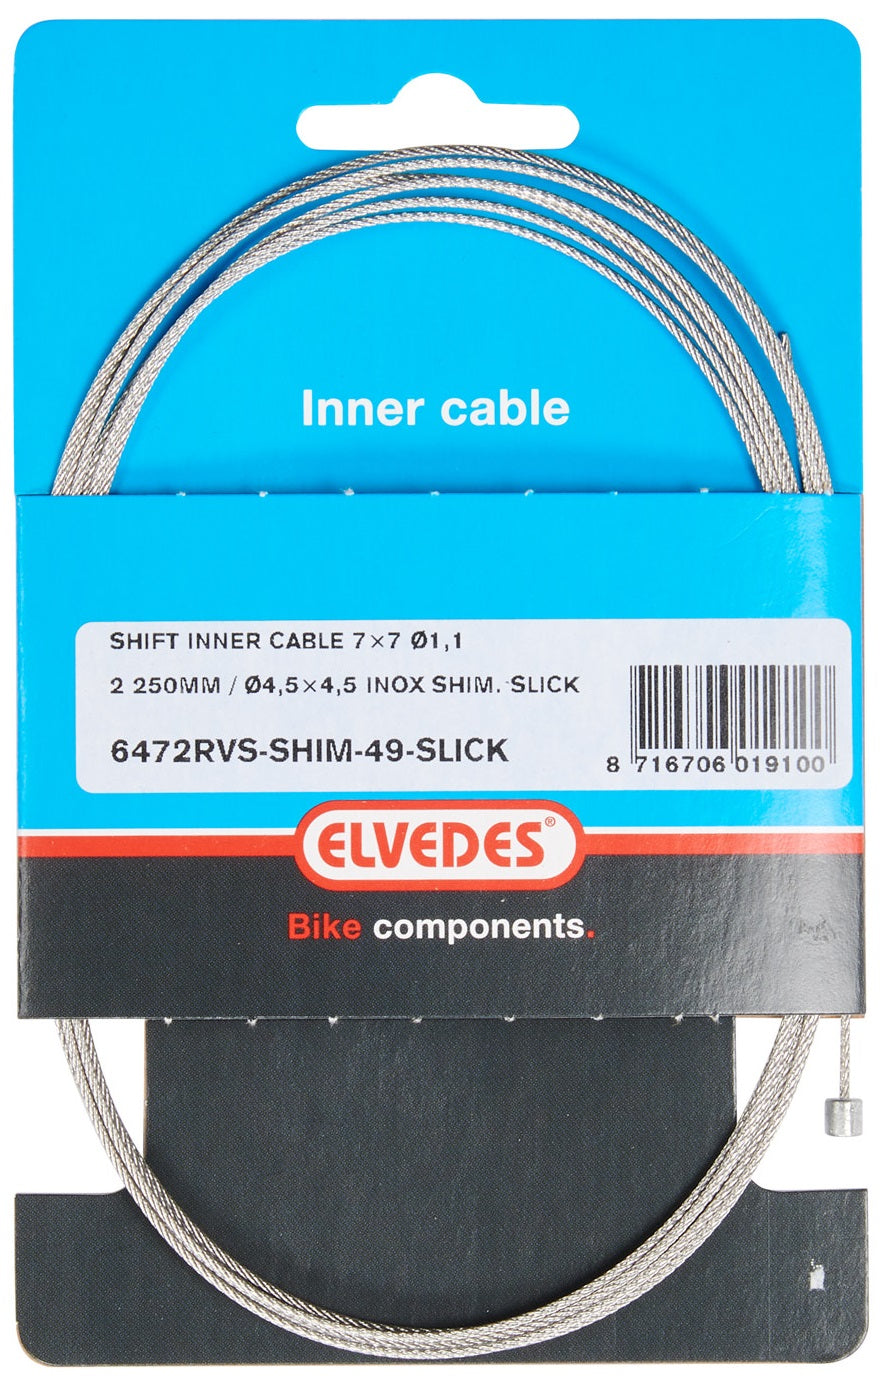 Shimano inner gear cable 225 cm x 1.1 mm